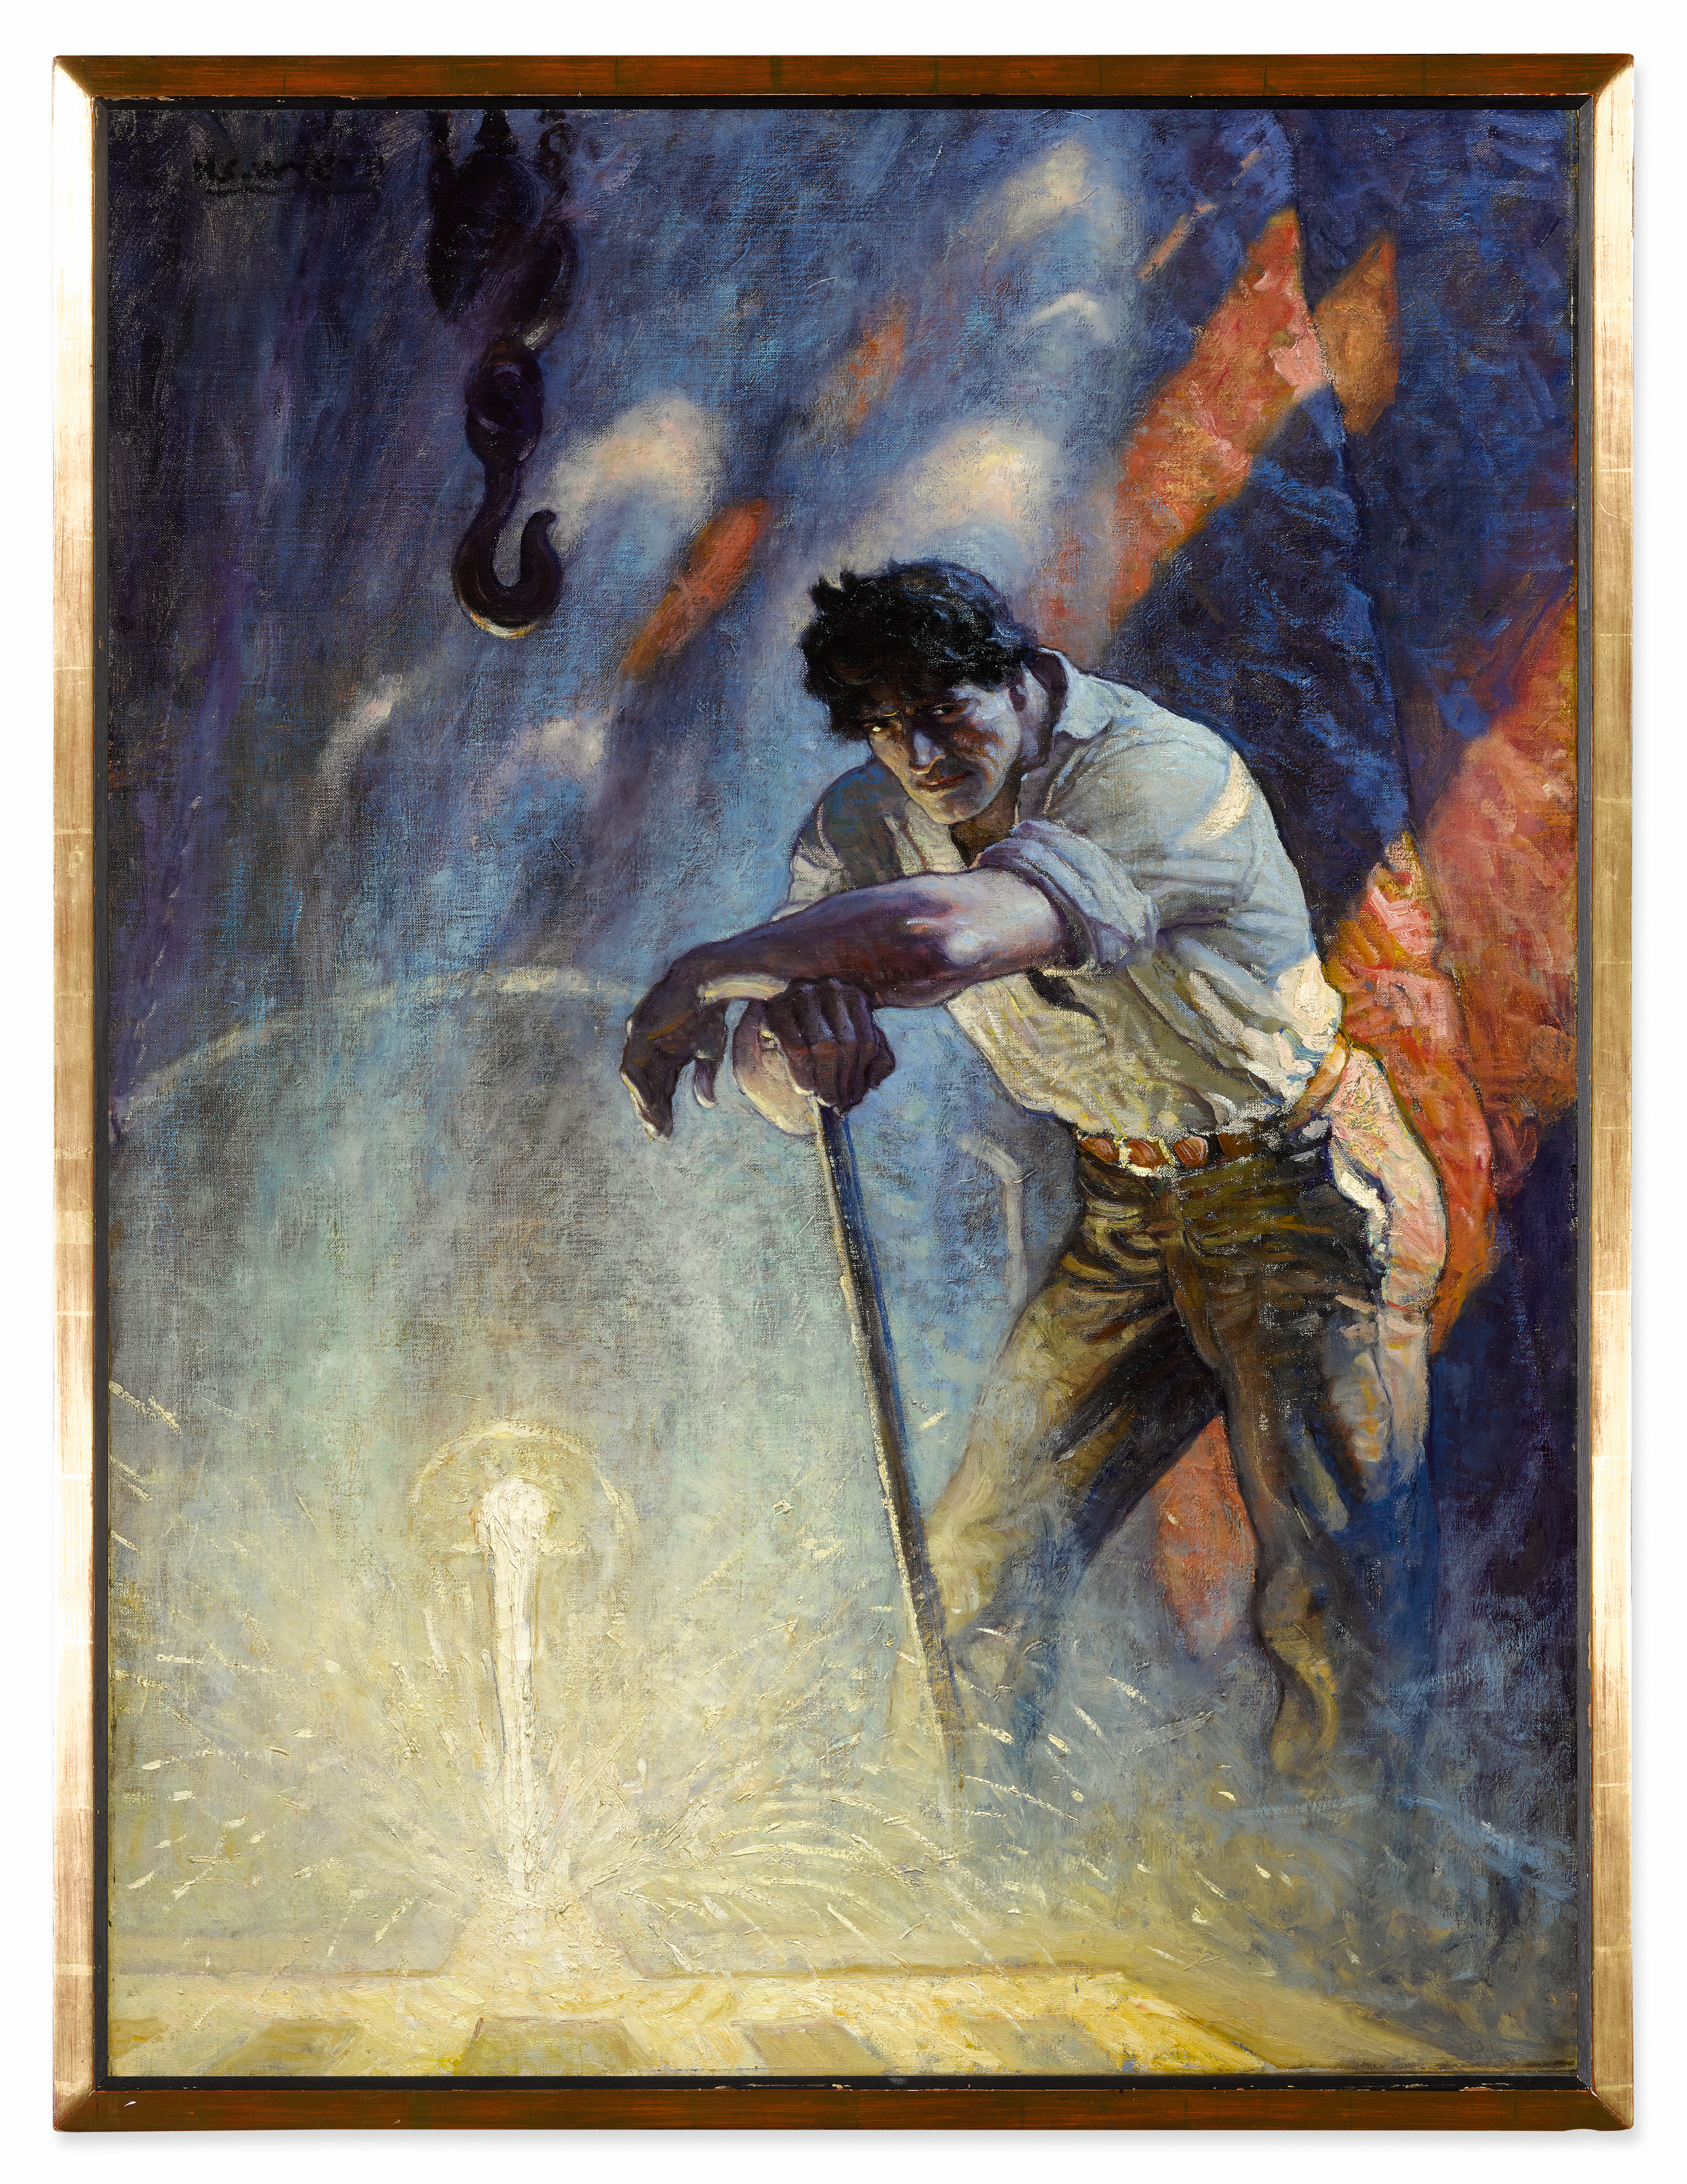 N. C. Wyeth, “Slag was a figure for sculptors” (1918), illustration for “The Mildest-Mannered Man,” Everybody’s Magazine, 1919, Lucas Museum of Narrative Art, Los Angeles